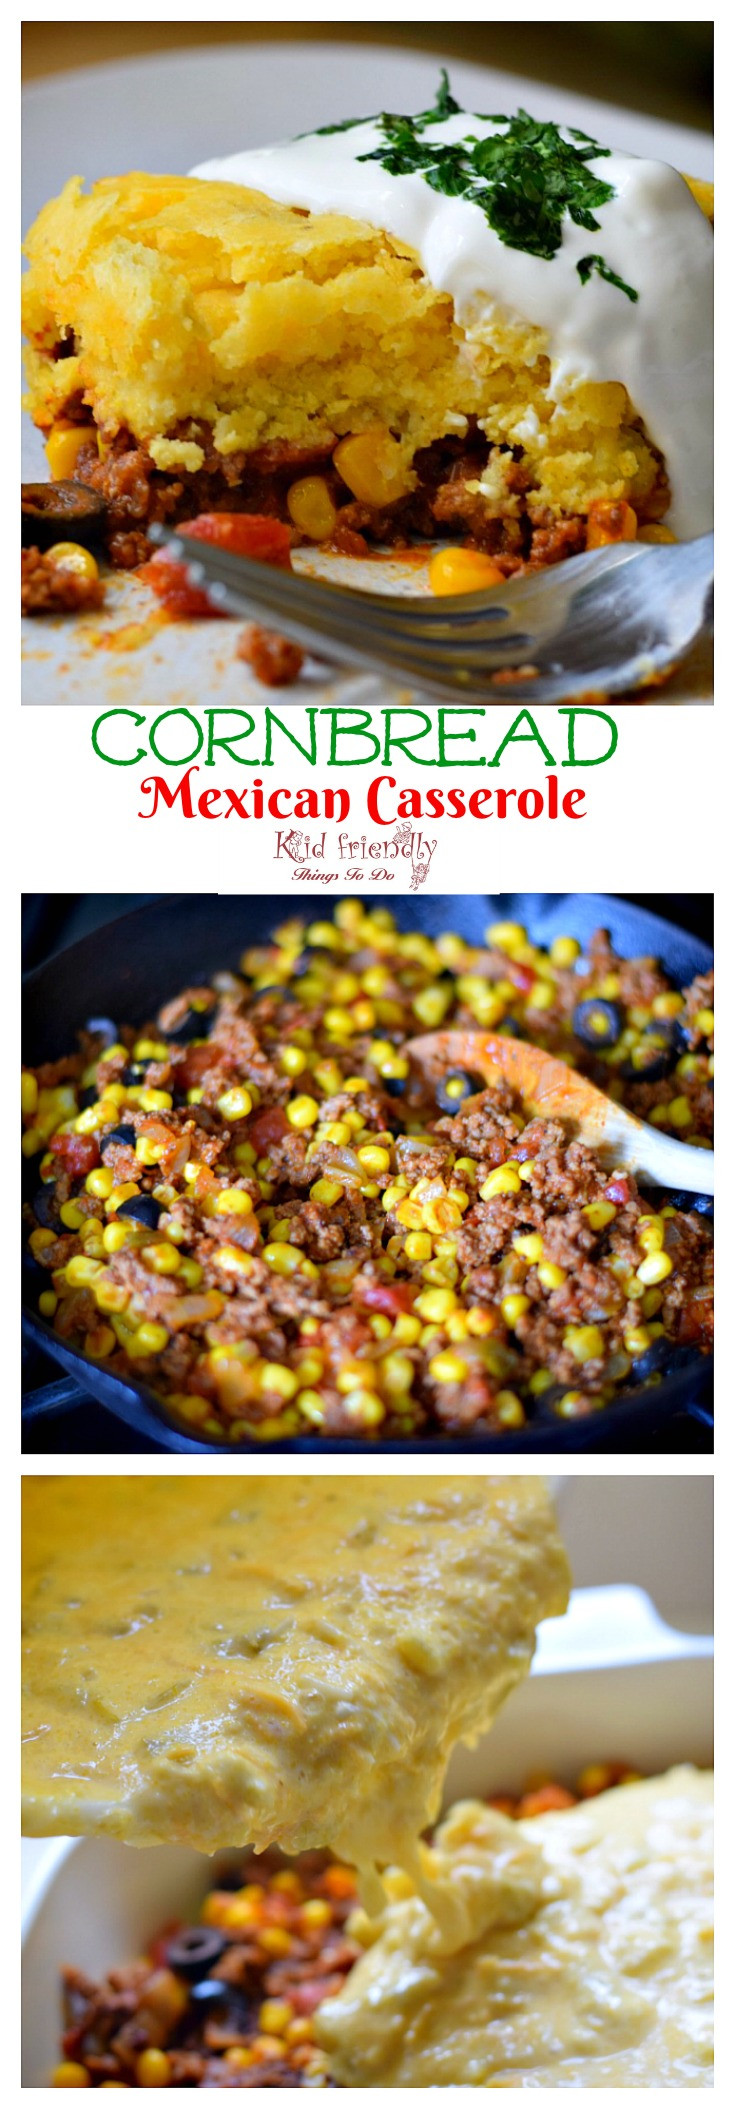 Mexican Casseroles With Ground Beef
 Cornbread and Ground Beef Mexican Casserole Recipe